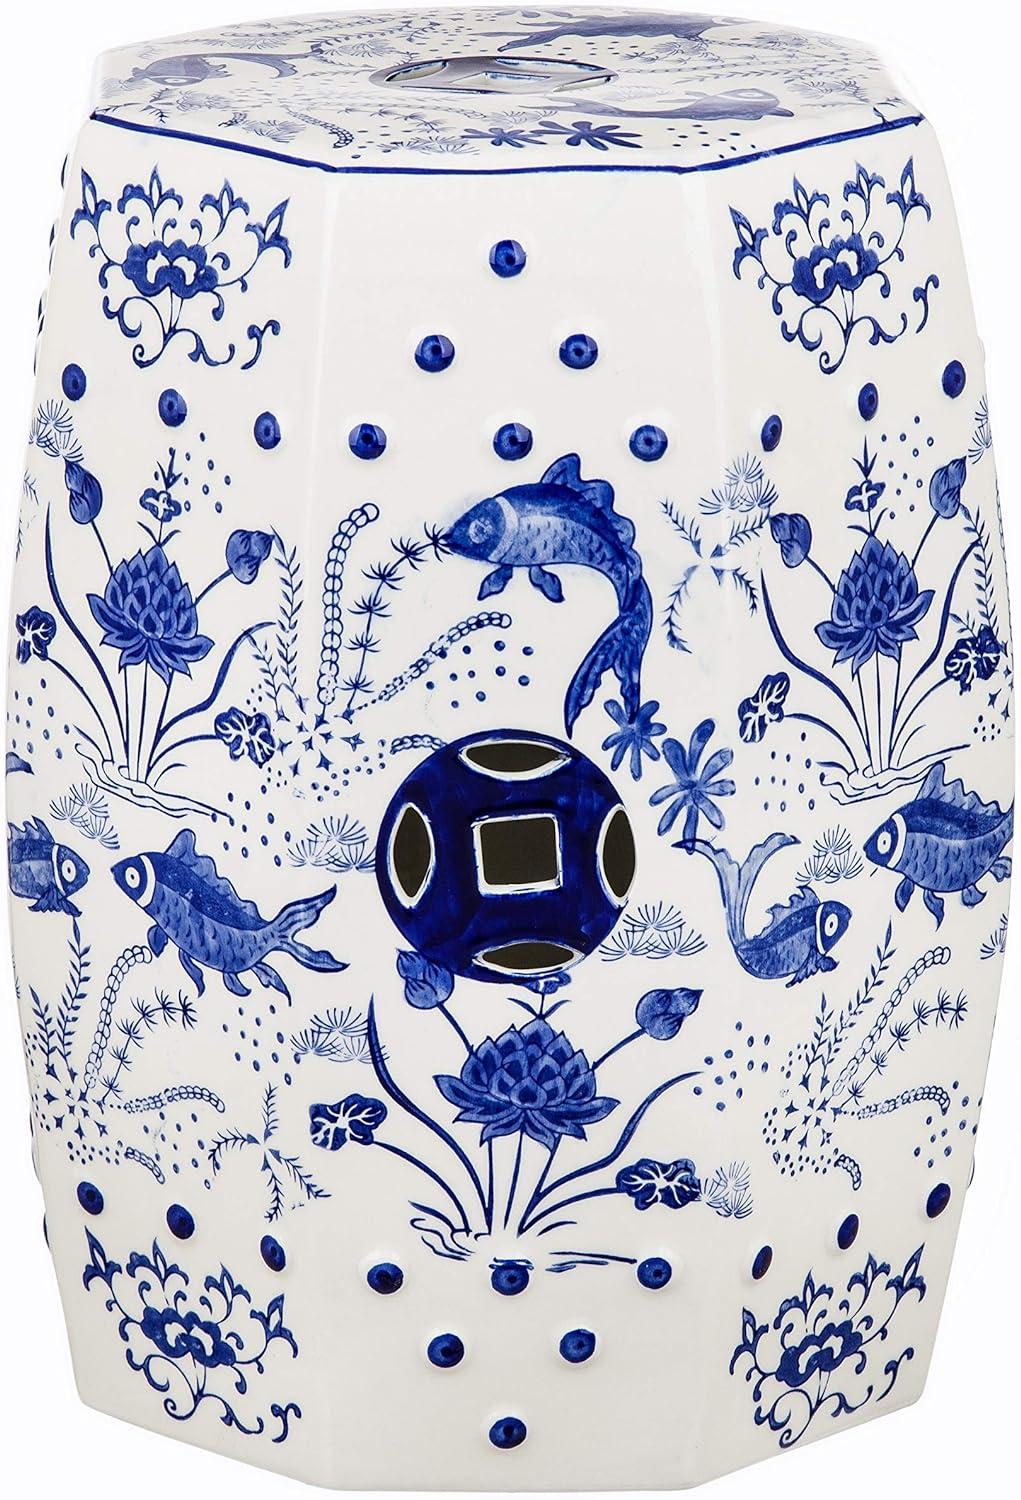 Cloud 9 Modern Chinoiserie Blue and White Ceramic Garden Stool